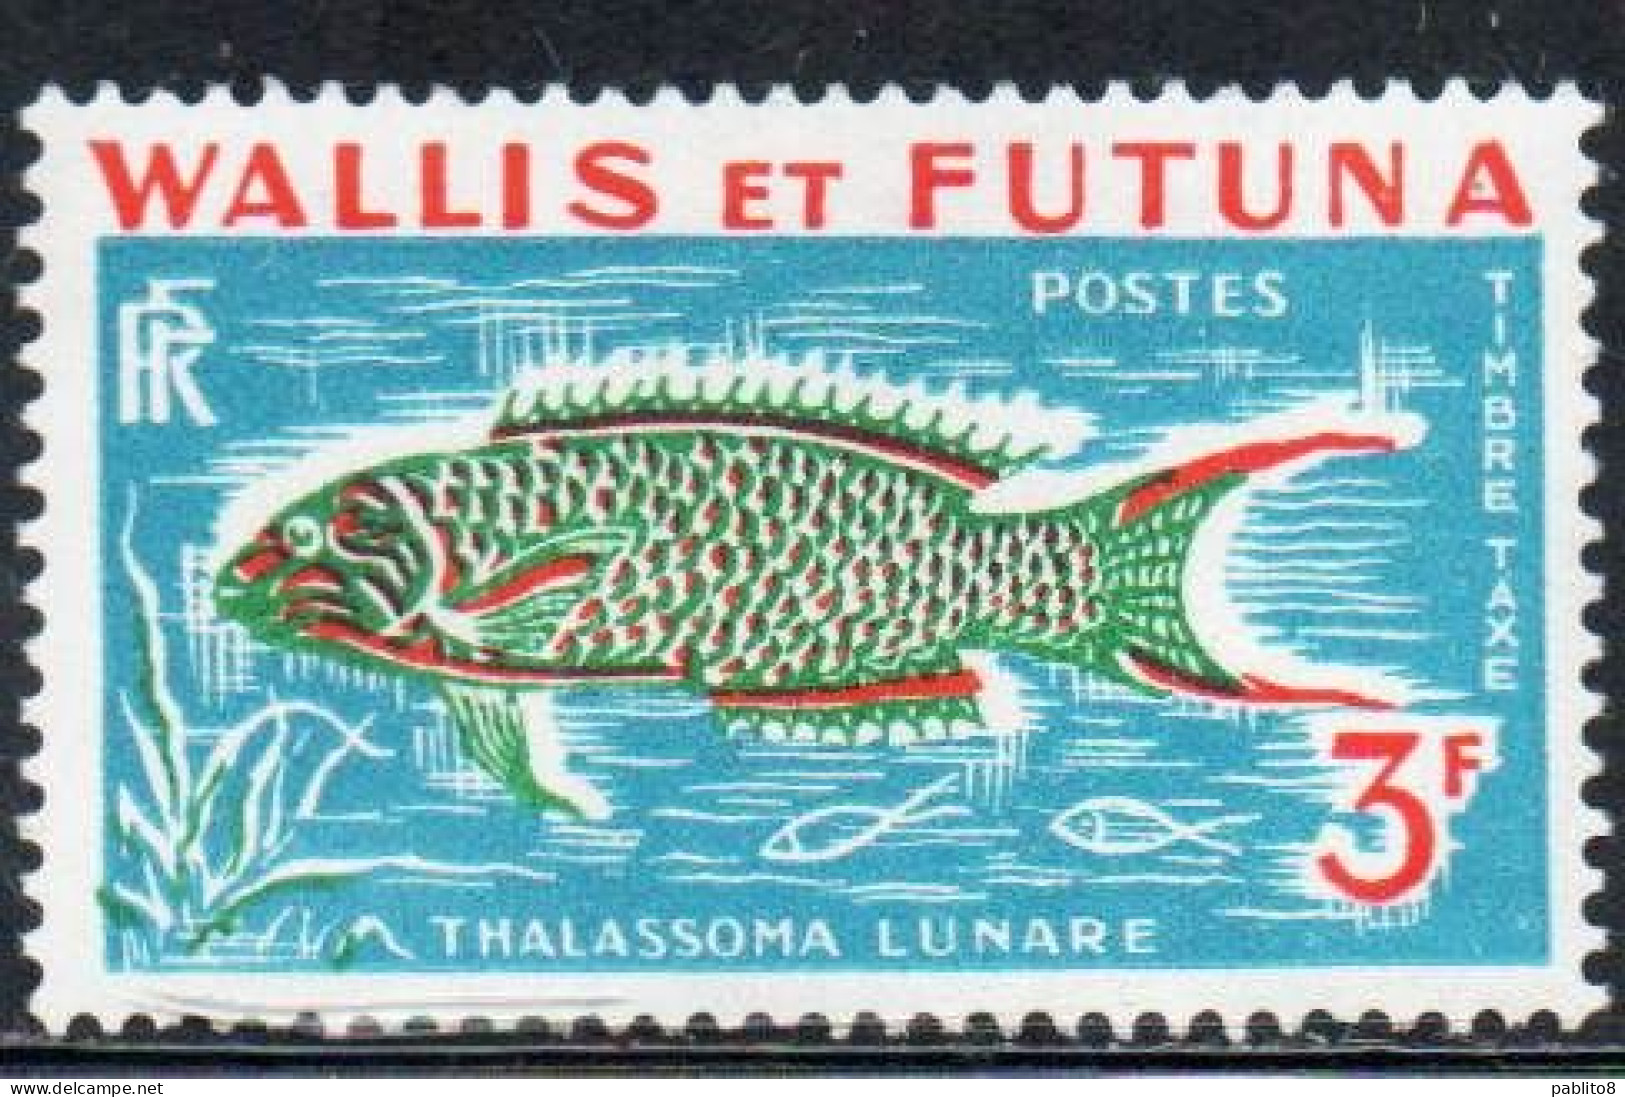 WALLIS AND FUTUNA ISLANDS 1963 POSTAGE DUE STAMPS TAXE SEGNATASSE THALASSOMA LUNARE 3fr MH - Postage Due